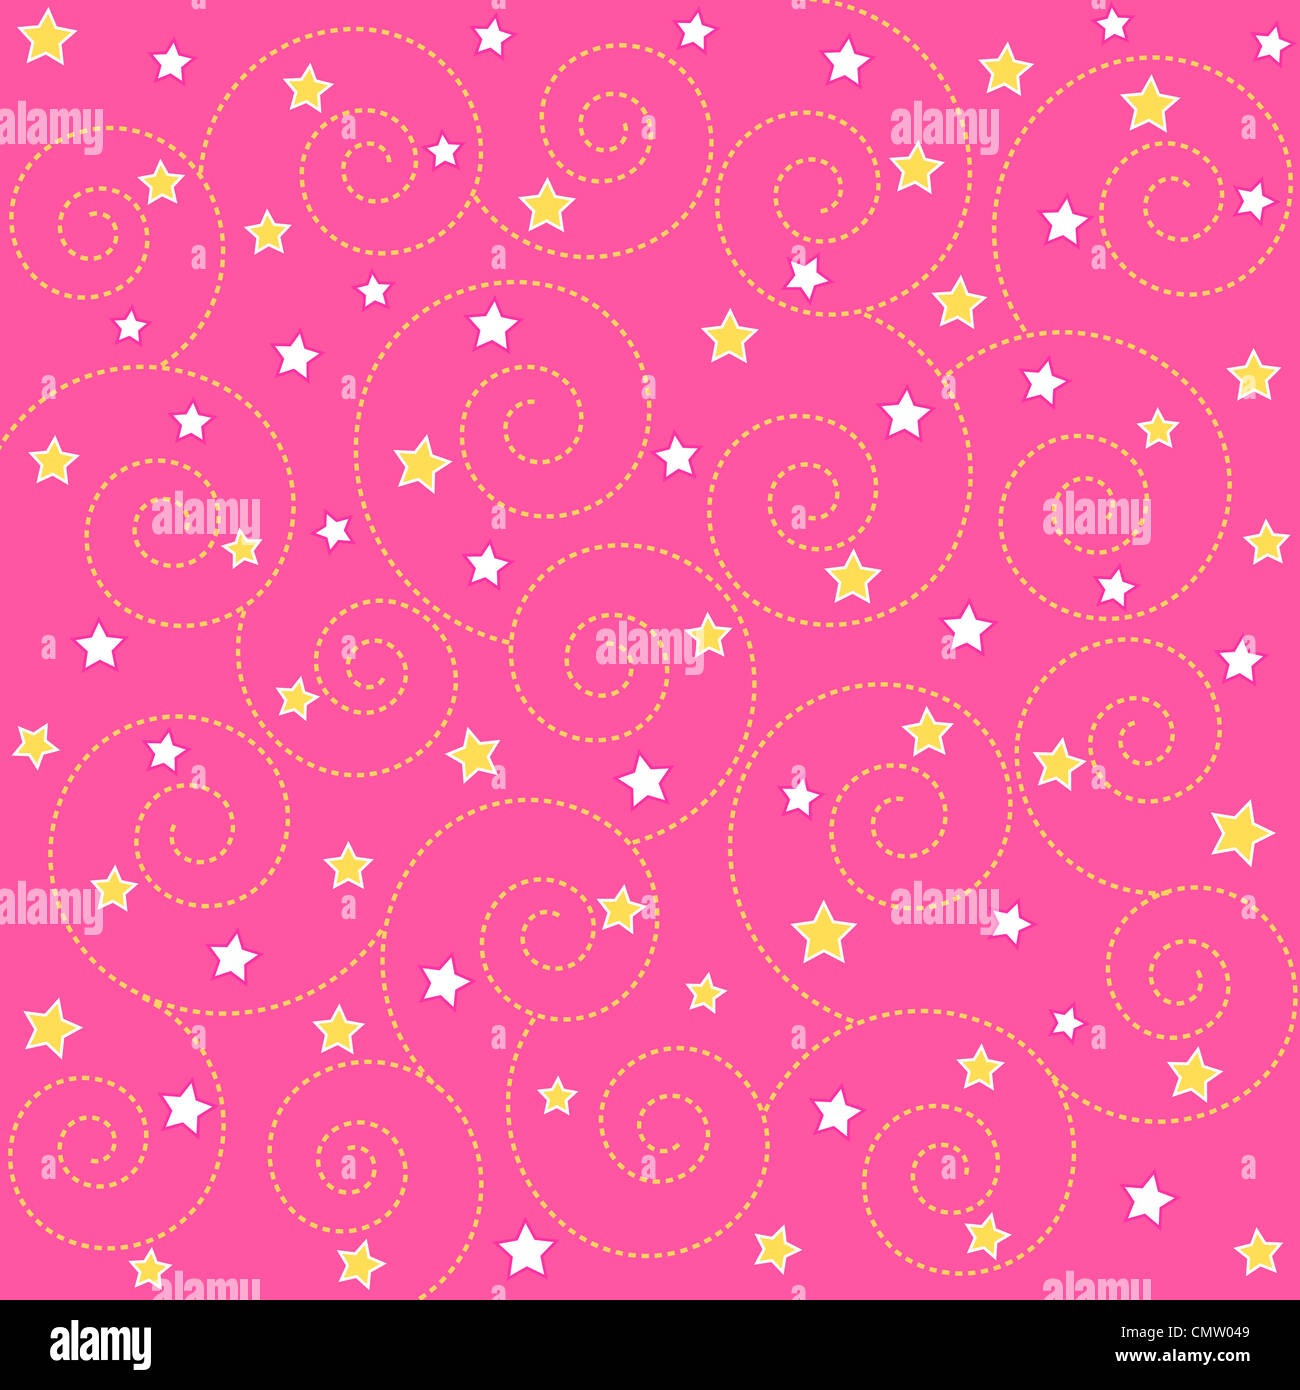 Stars and spiral pattern on pink Stock Photo